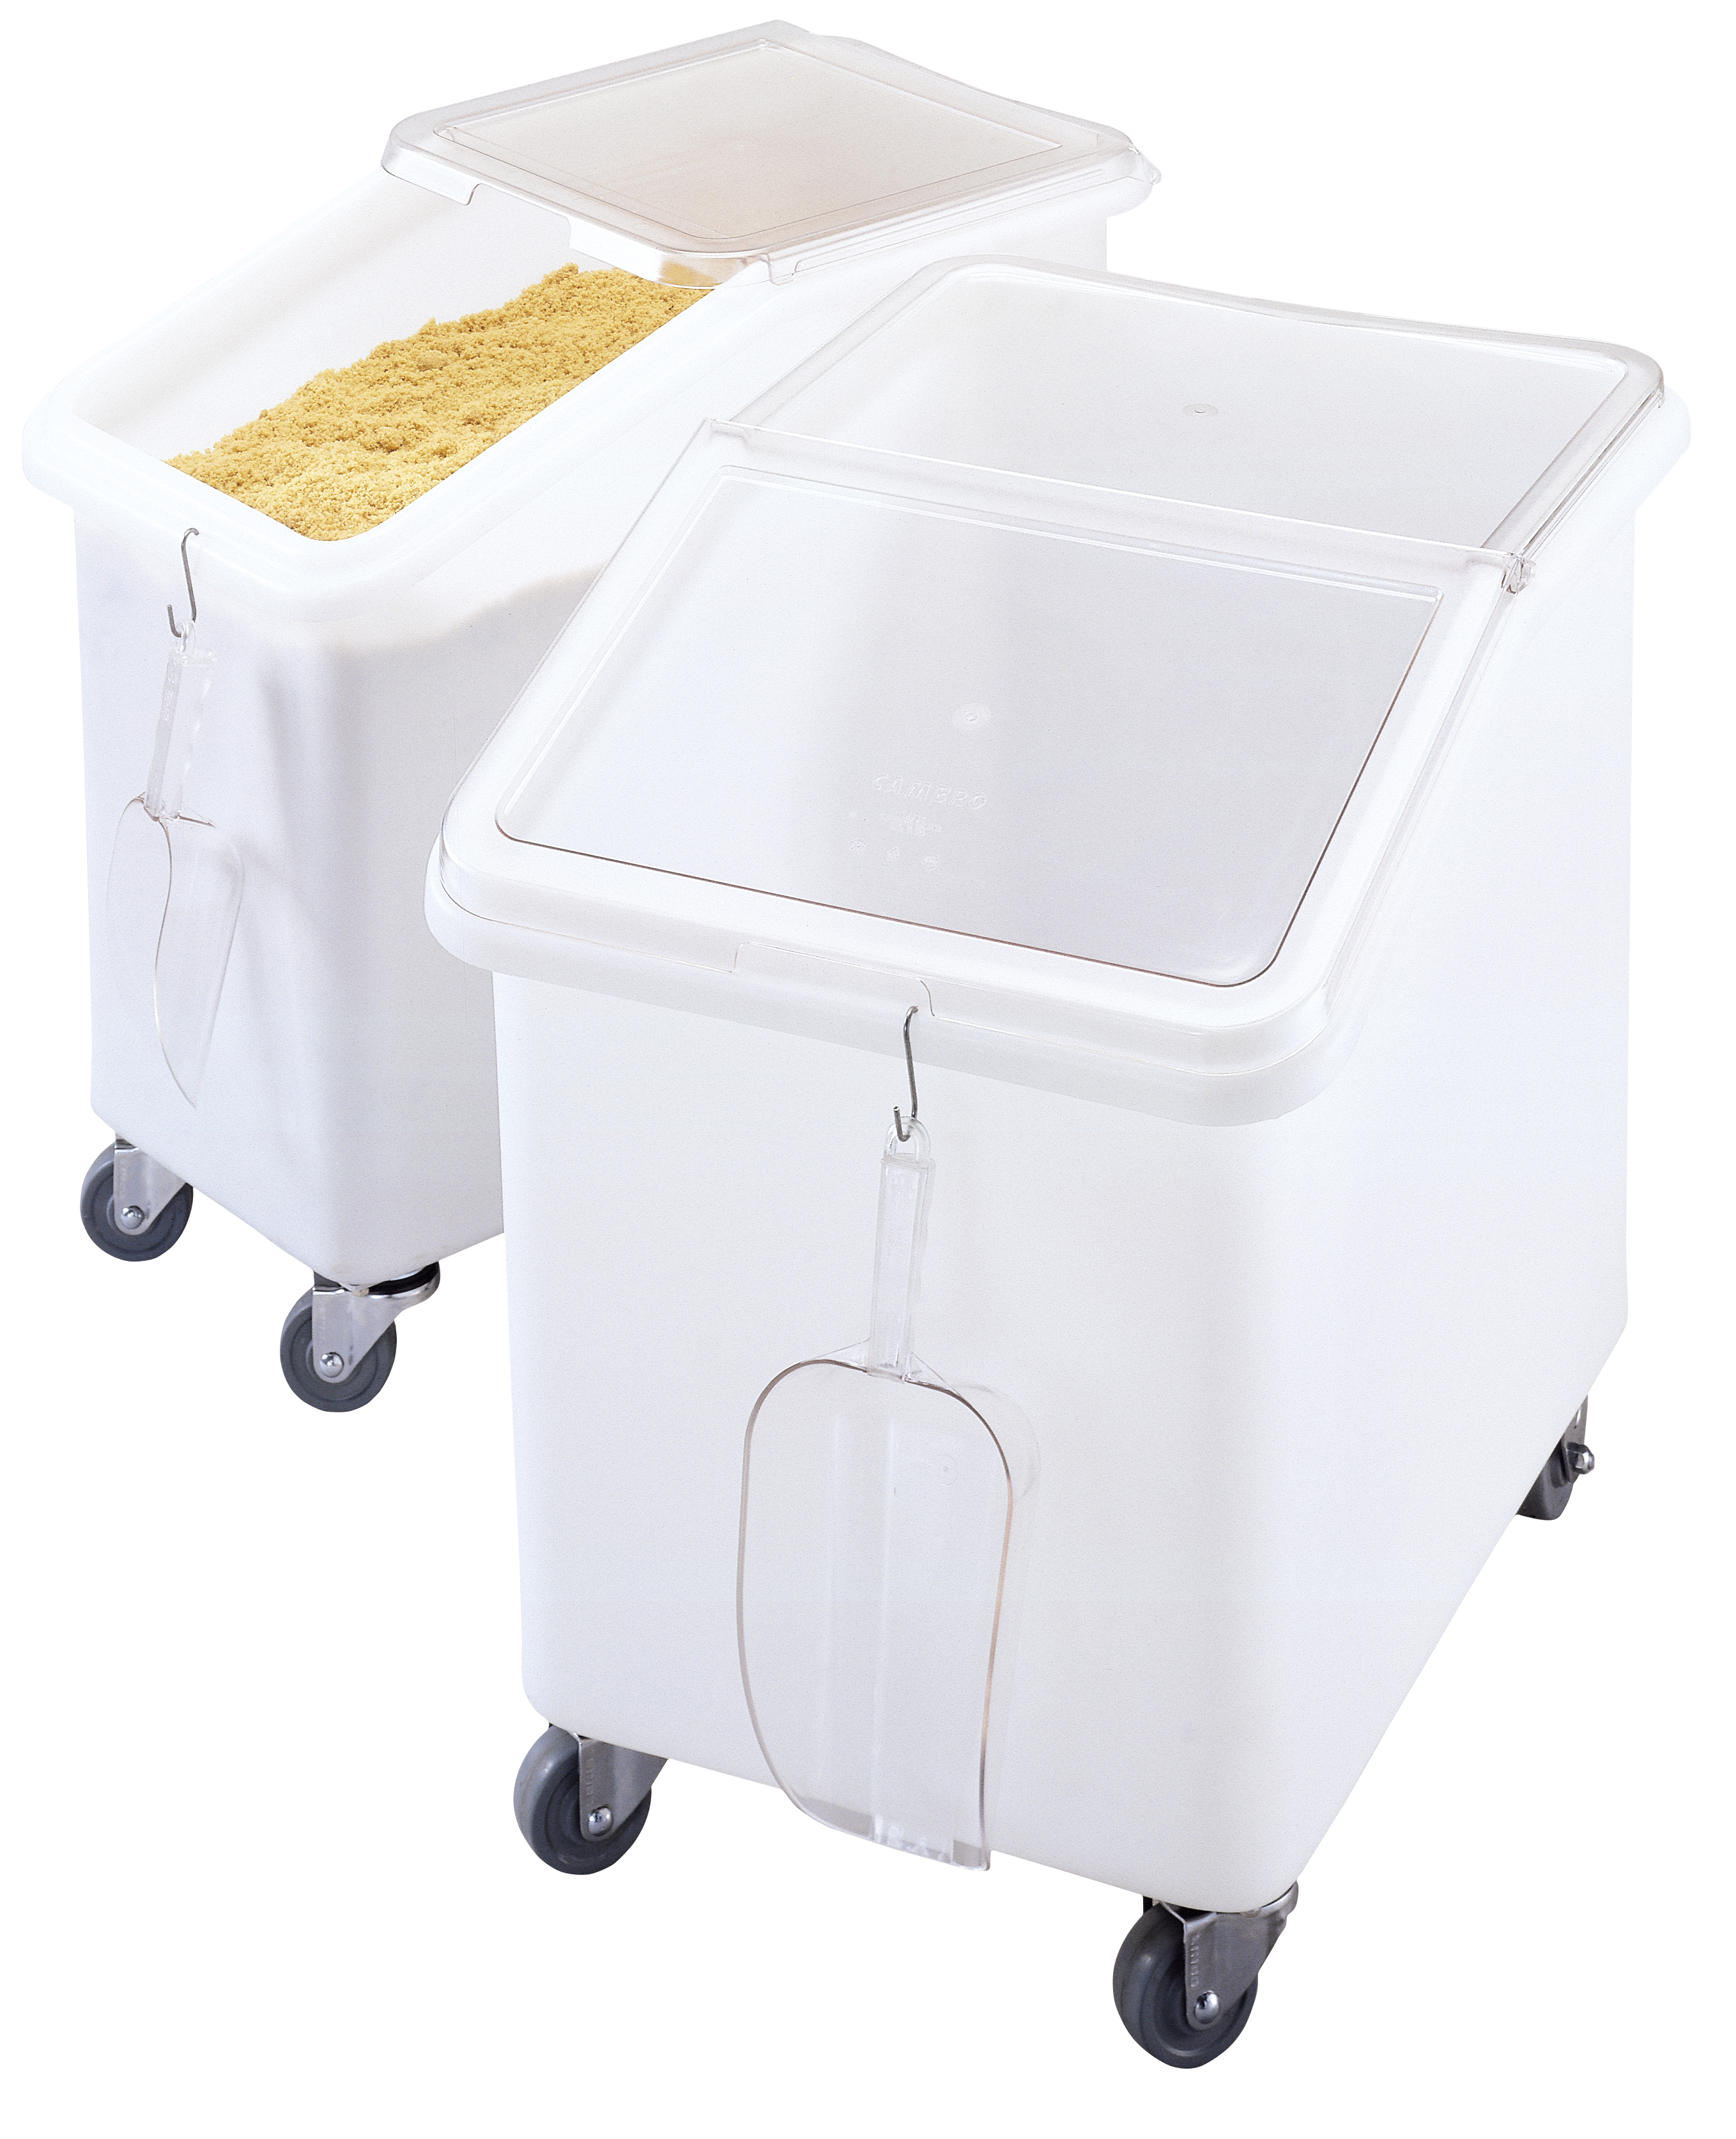 Two white ingredient bins, one empty, one with yellow dry ingredient